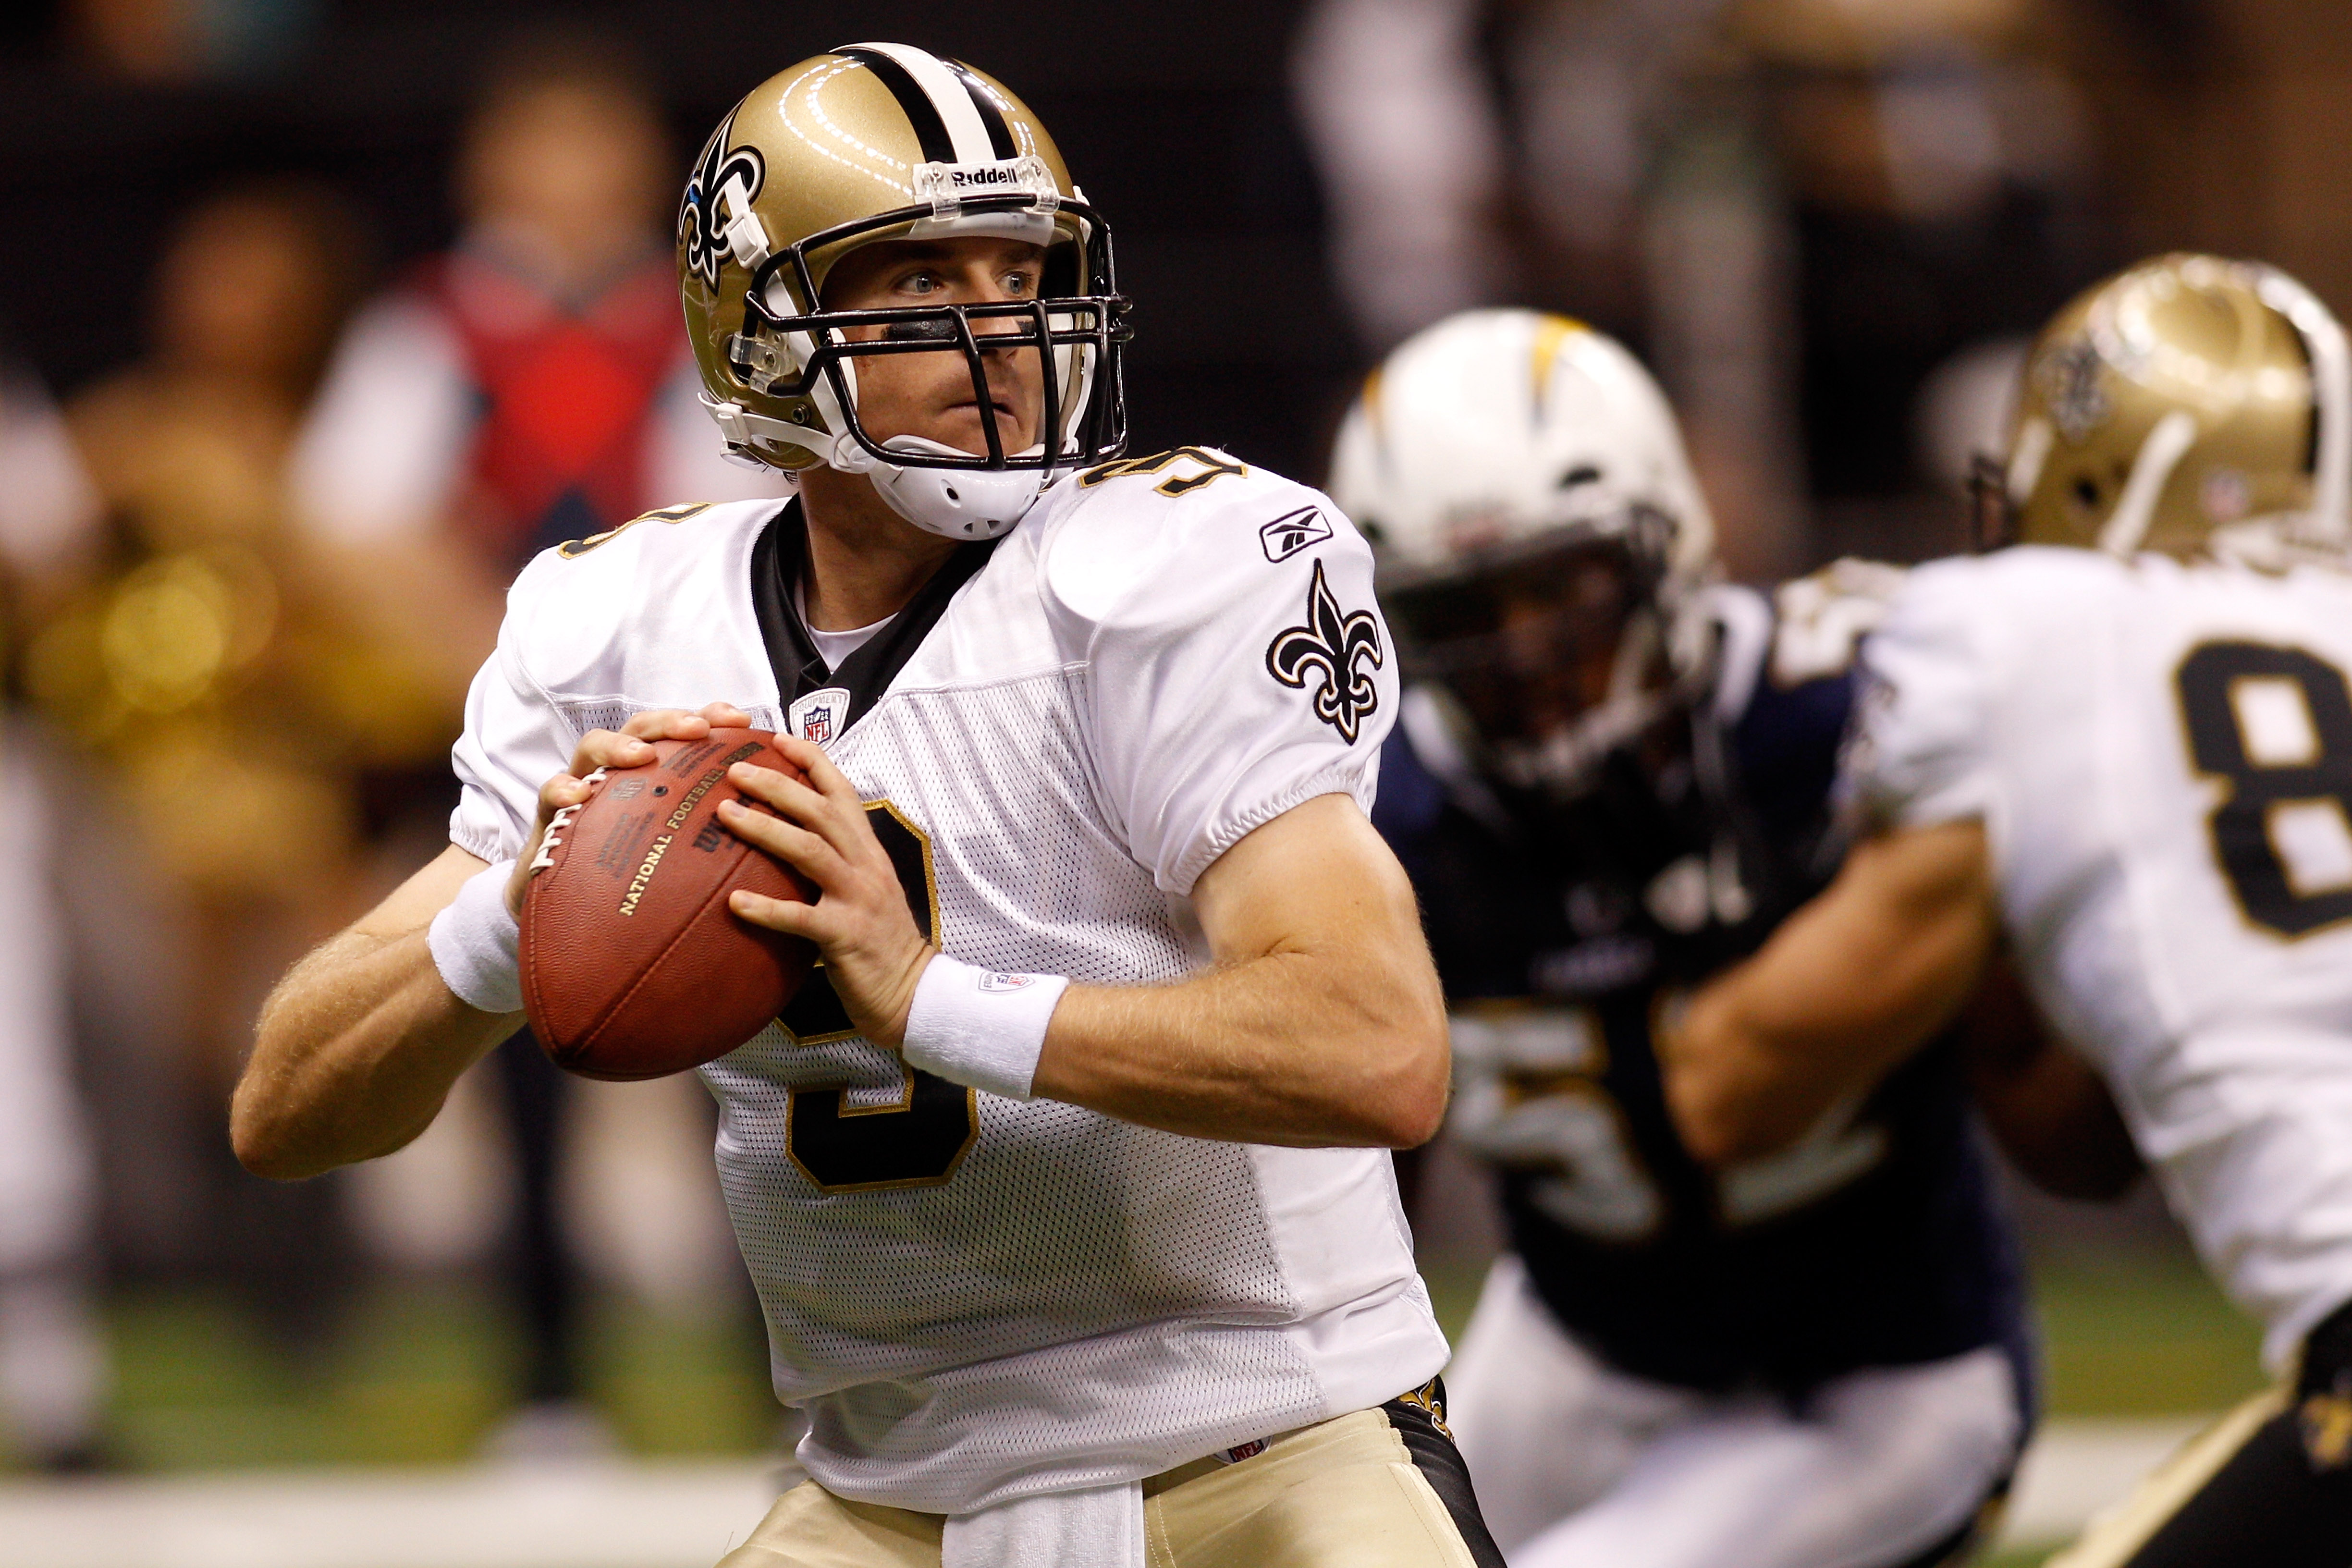 NEW ORLEANS - AUGUST 27:  Drew Brees #9 of the New Orleans Saints in action against the San Diego Chargers at the Louisiana Superdome on August 27, 2010 in New Orleans, Louisiana.  (Photo by Chris Graythen/Getty Images)